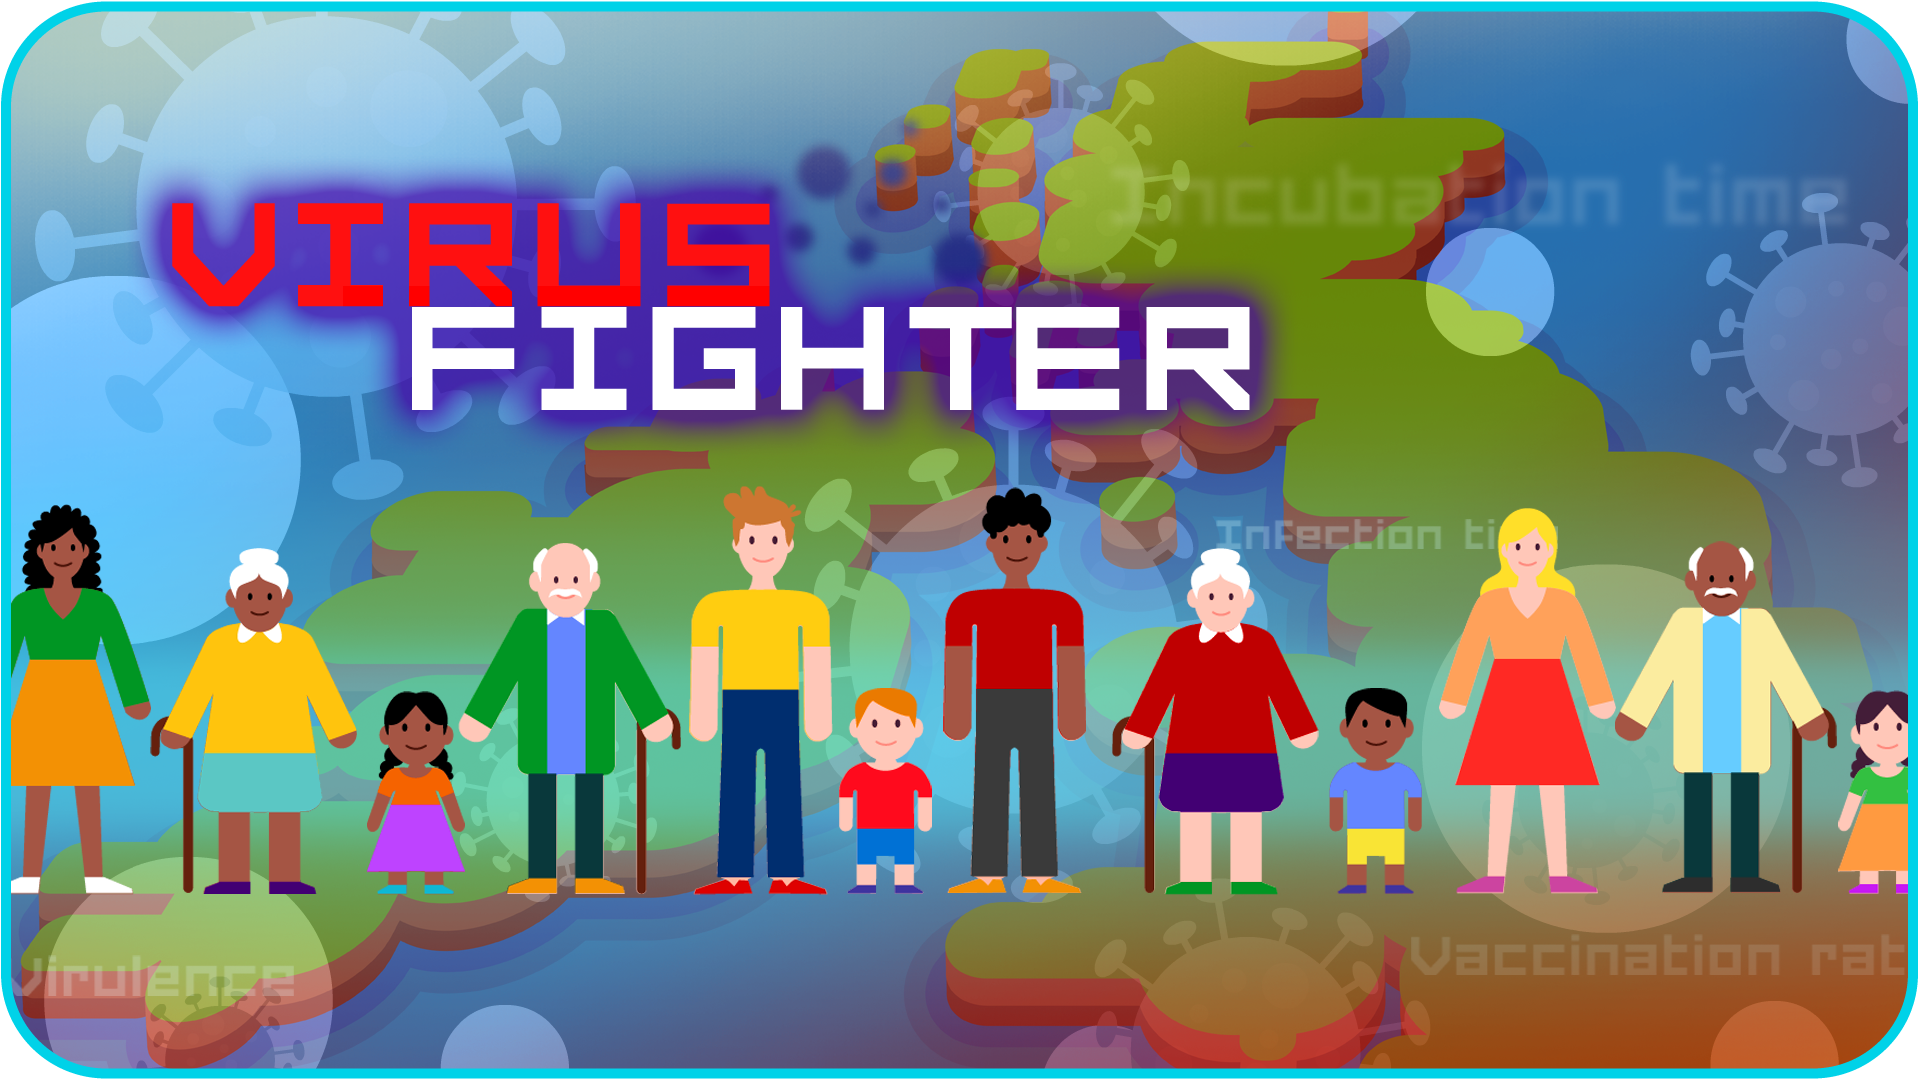 A slanted map of the UK, overlayed with several cartoon figures in a line. The image also features the 'Virus Fighter' logo in red, white and purple.